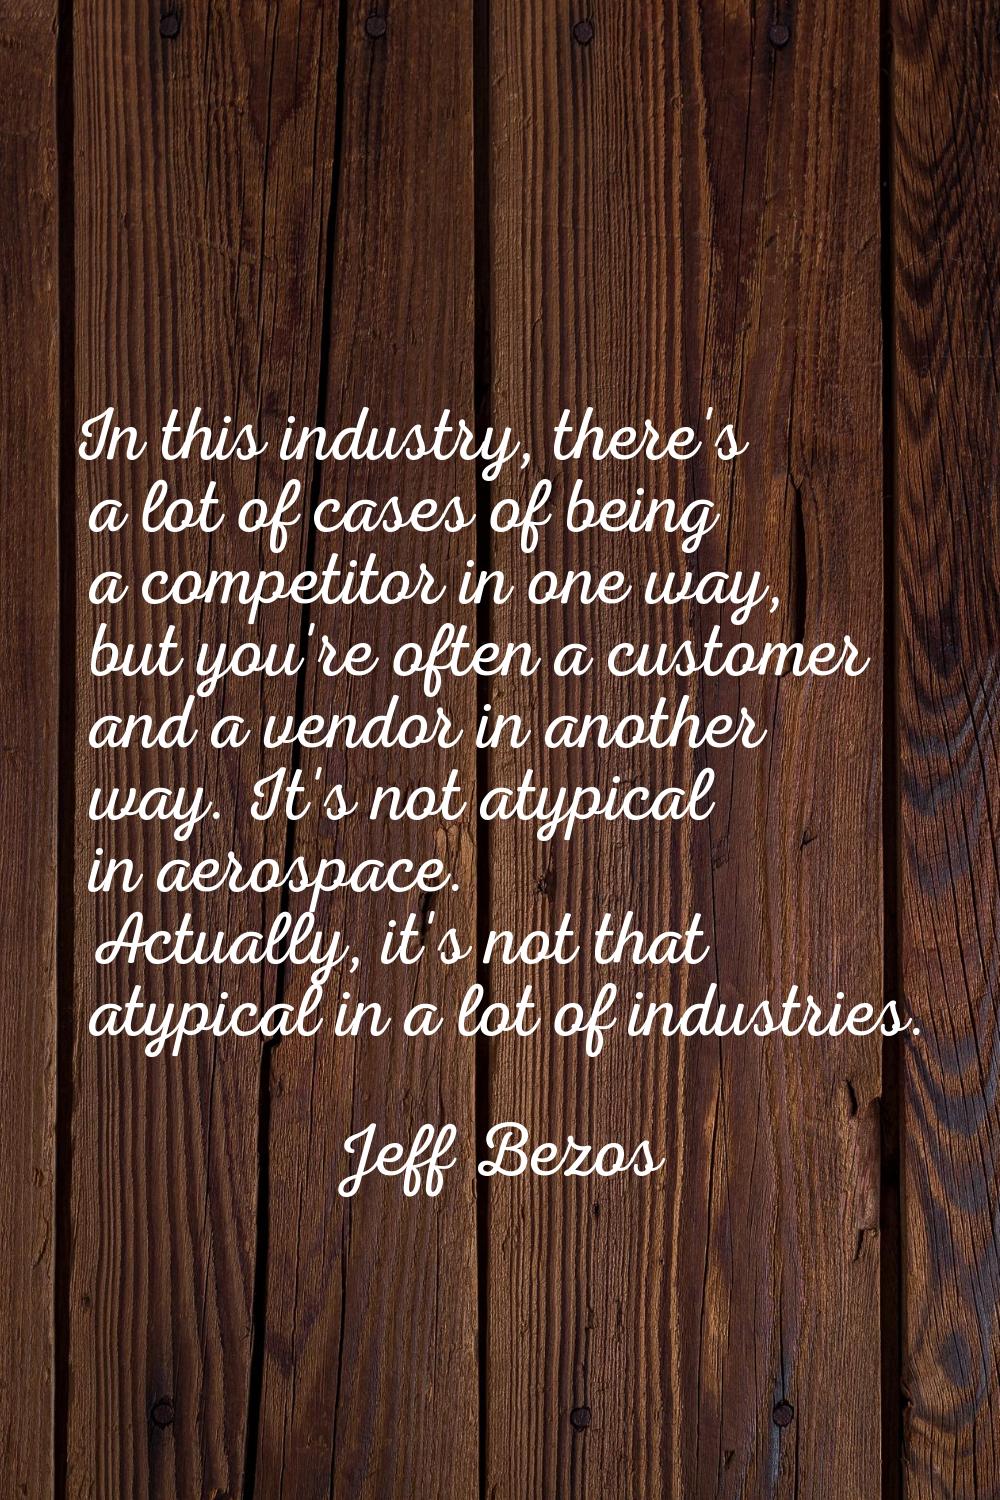 In this industry, there's a lot of cases of being a competitor in one way, but you're often a custo